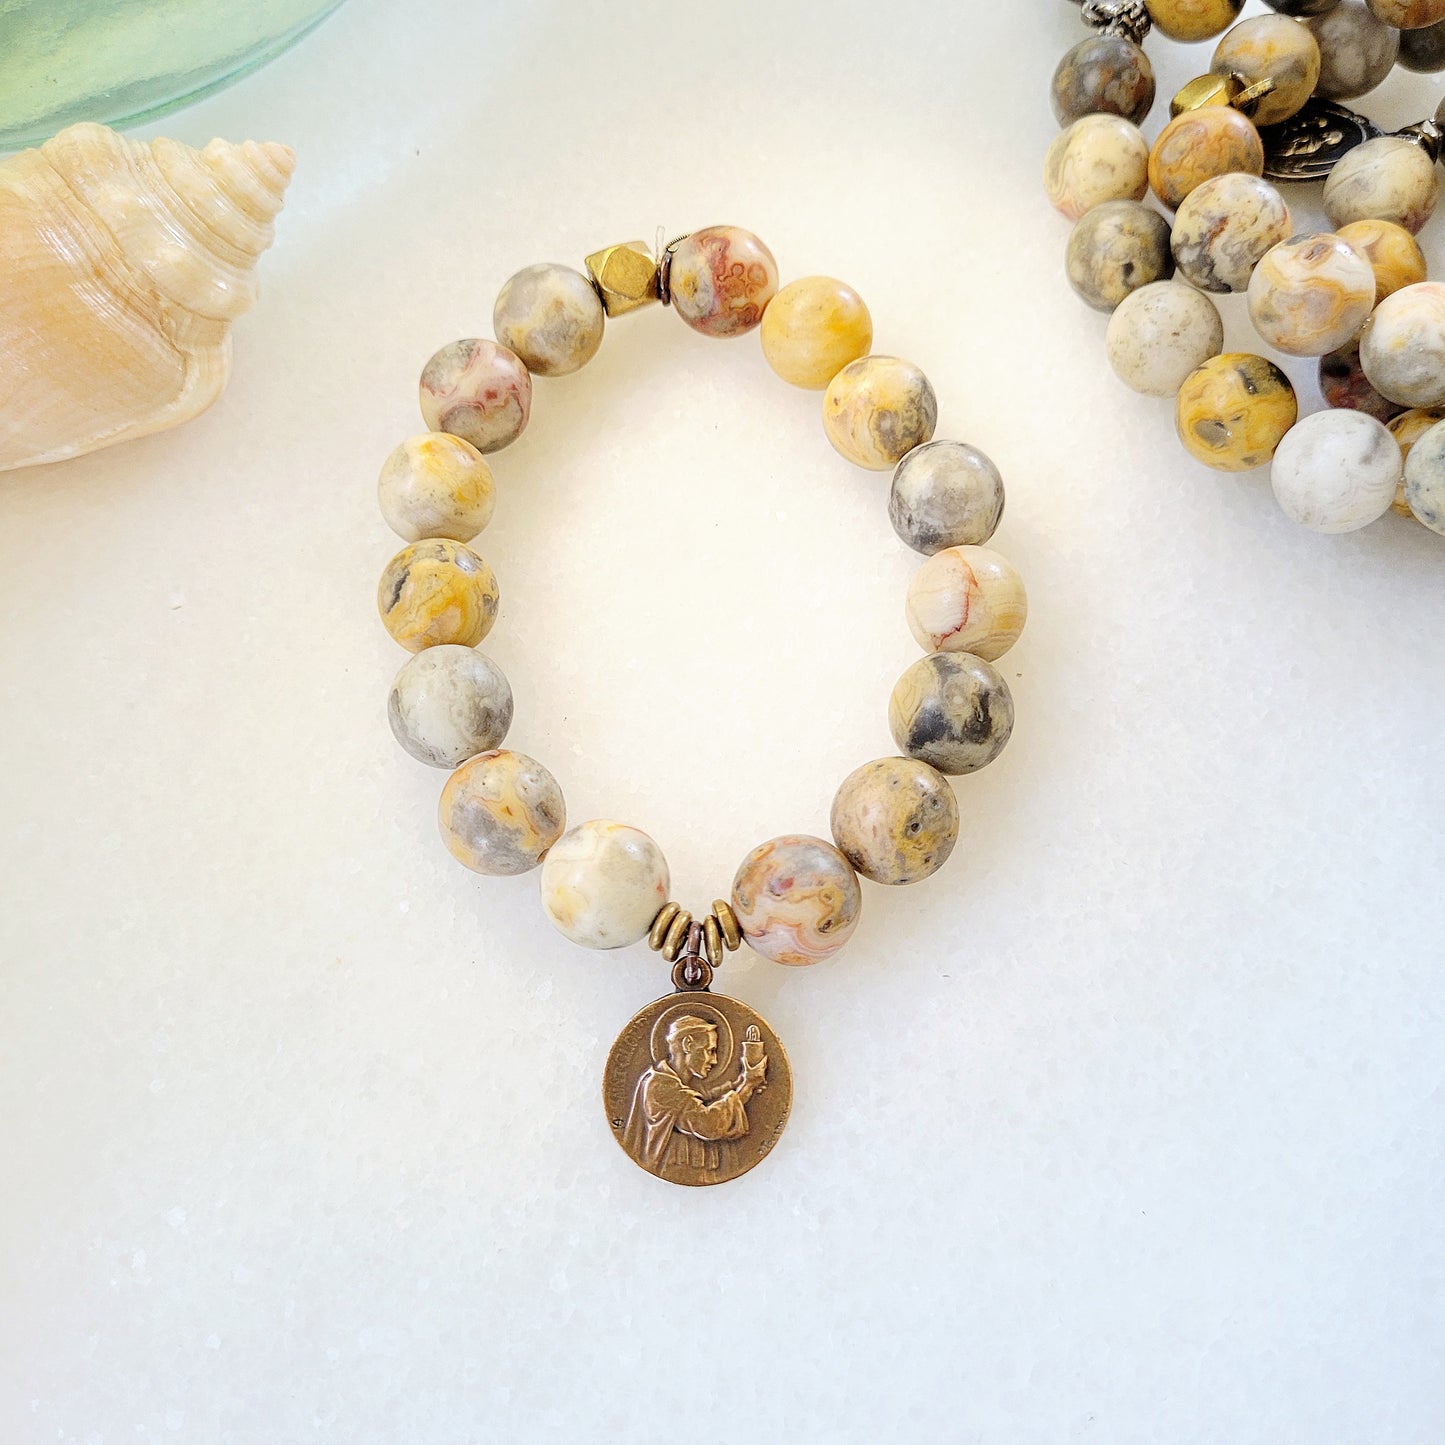 Crazy Lace Agate 16mm Beaded Bracelet w/ St. Cloud Medal - Afterlife Jewelry Designs